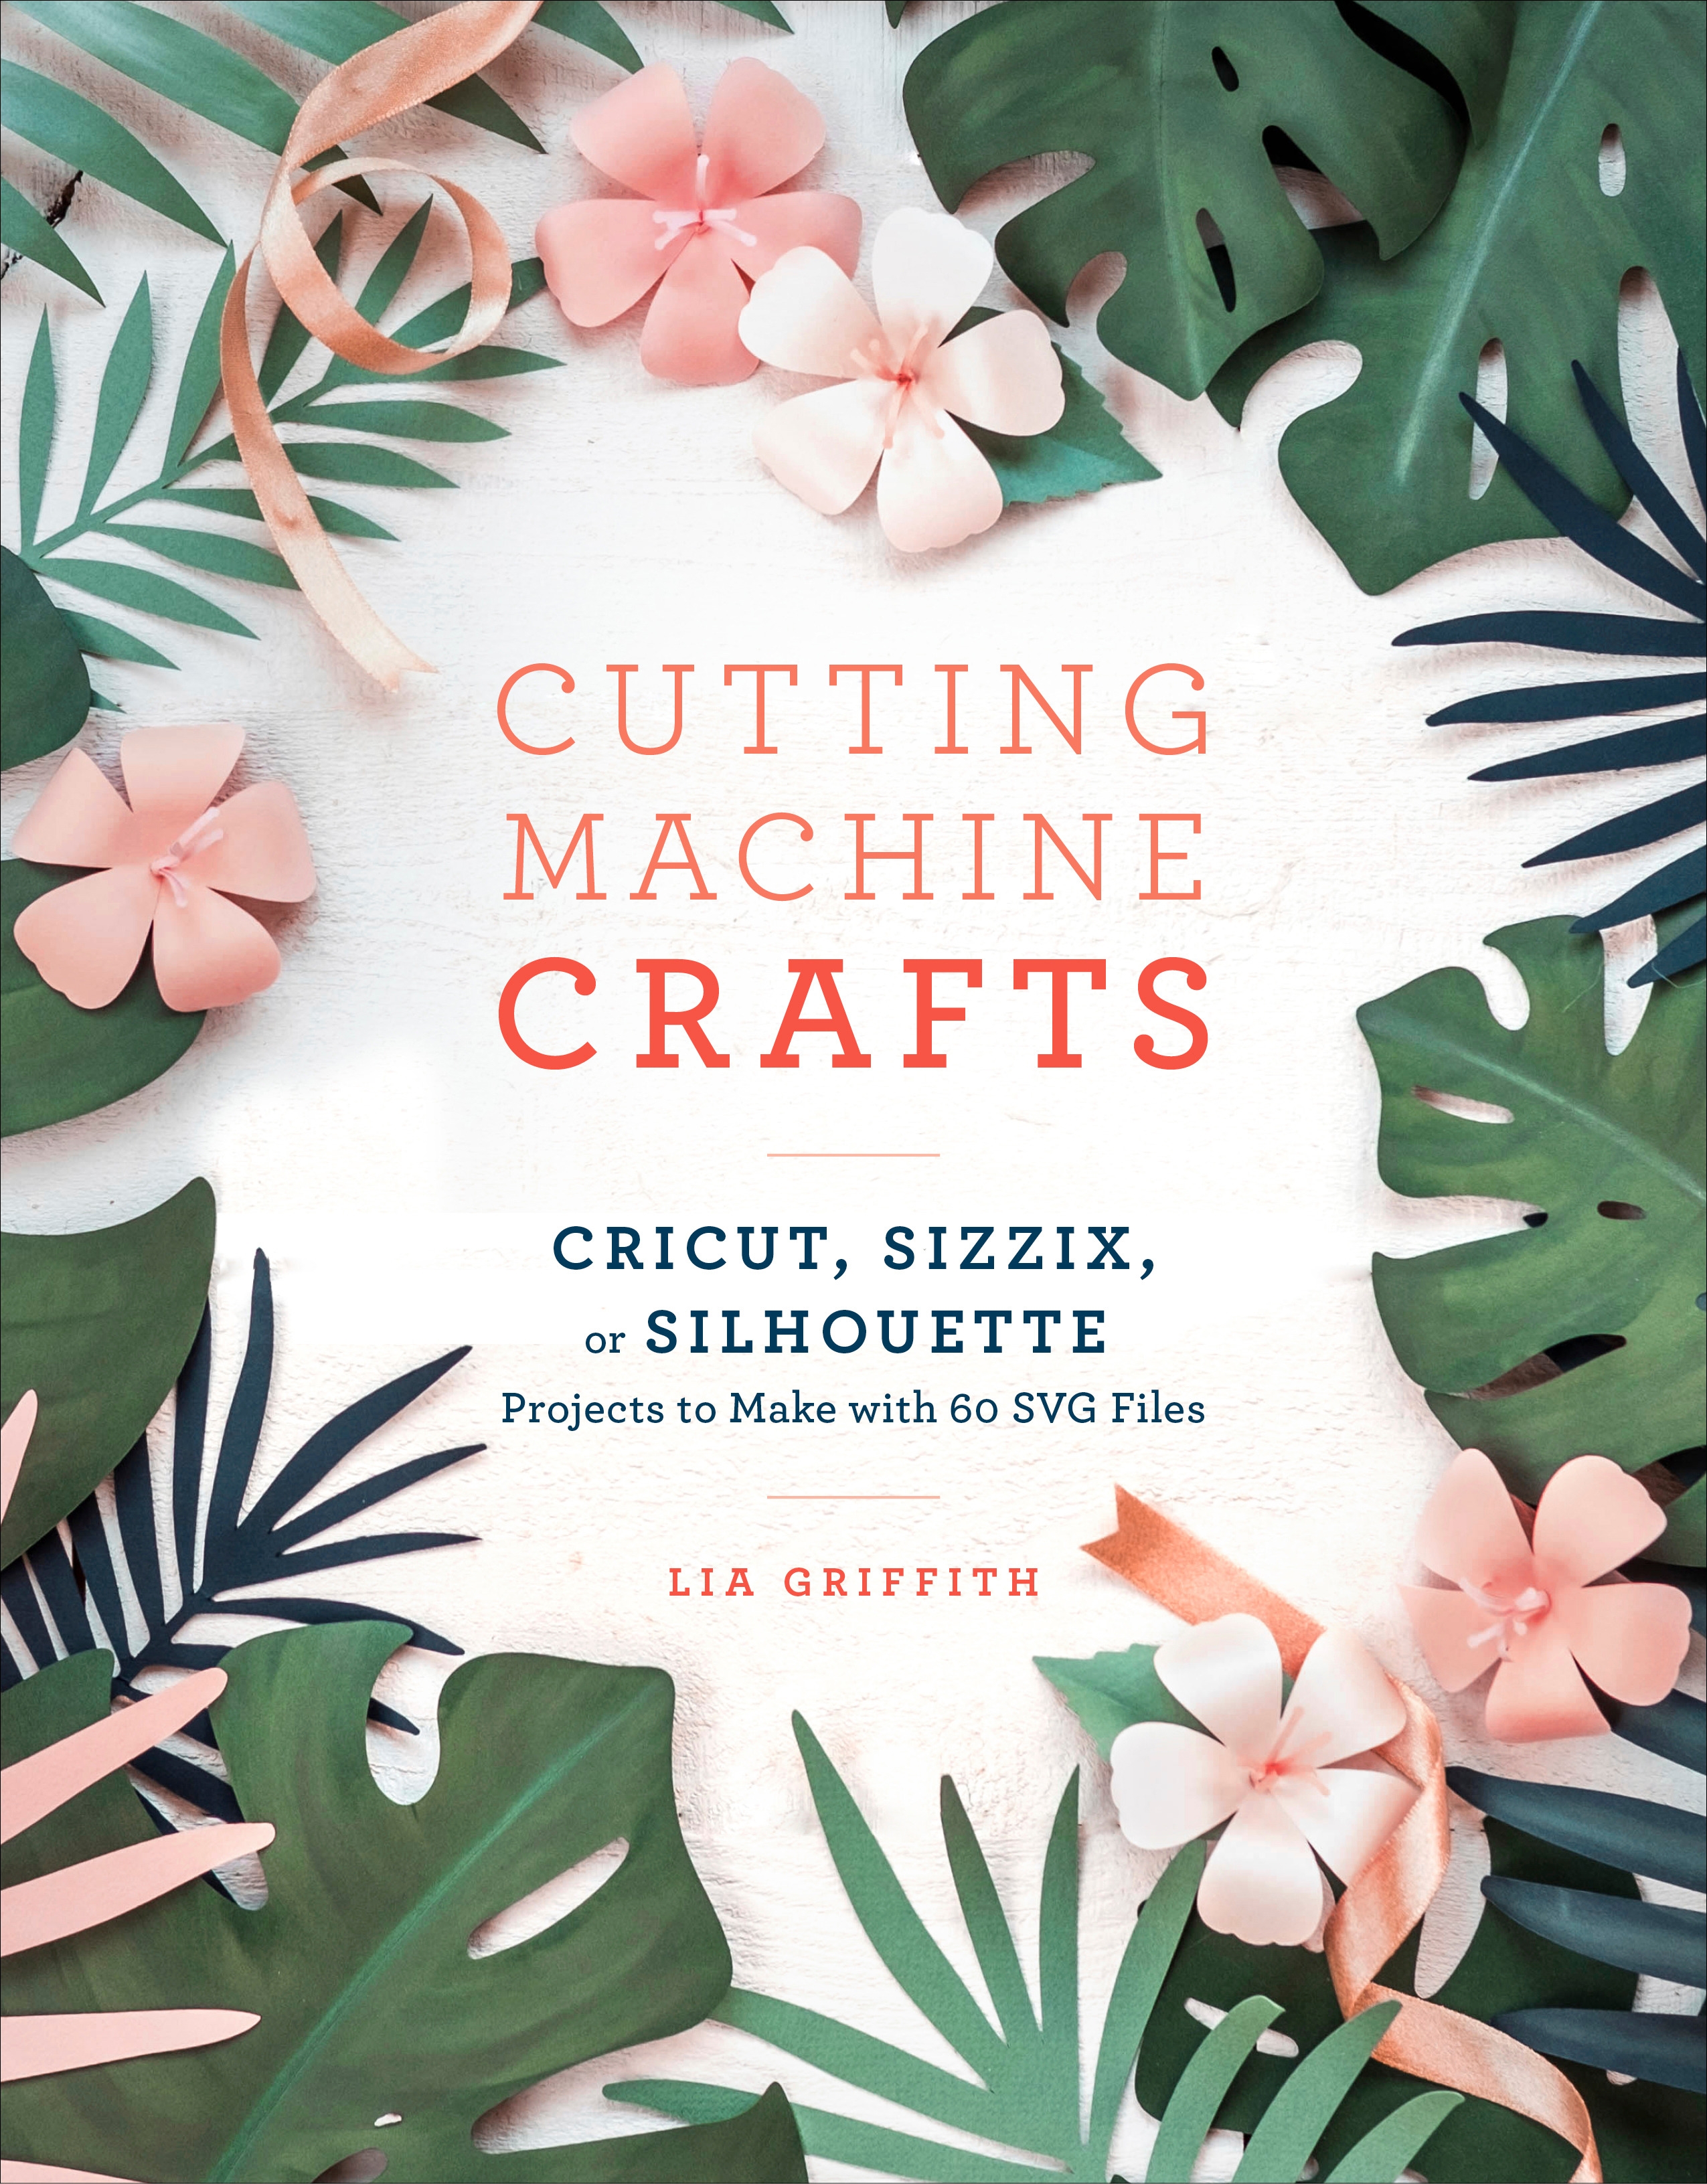 Download Free Cutting Machine Crafts With Your Cricut Sizzix Or Silhouette By Lia Griffith Penguin Books Australia PSD Mockup Template